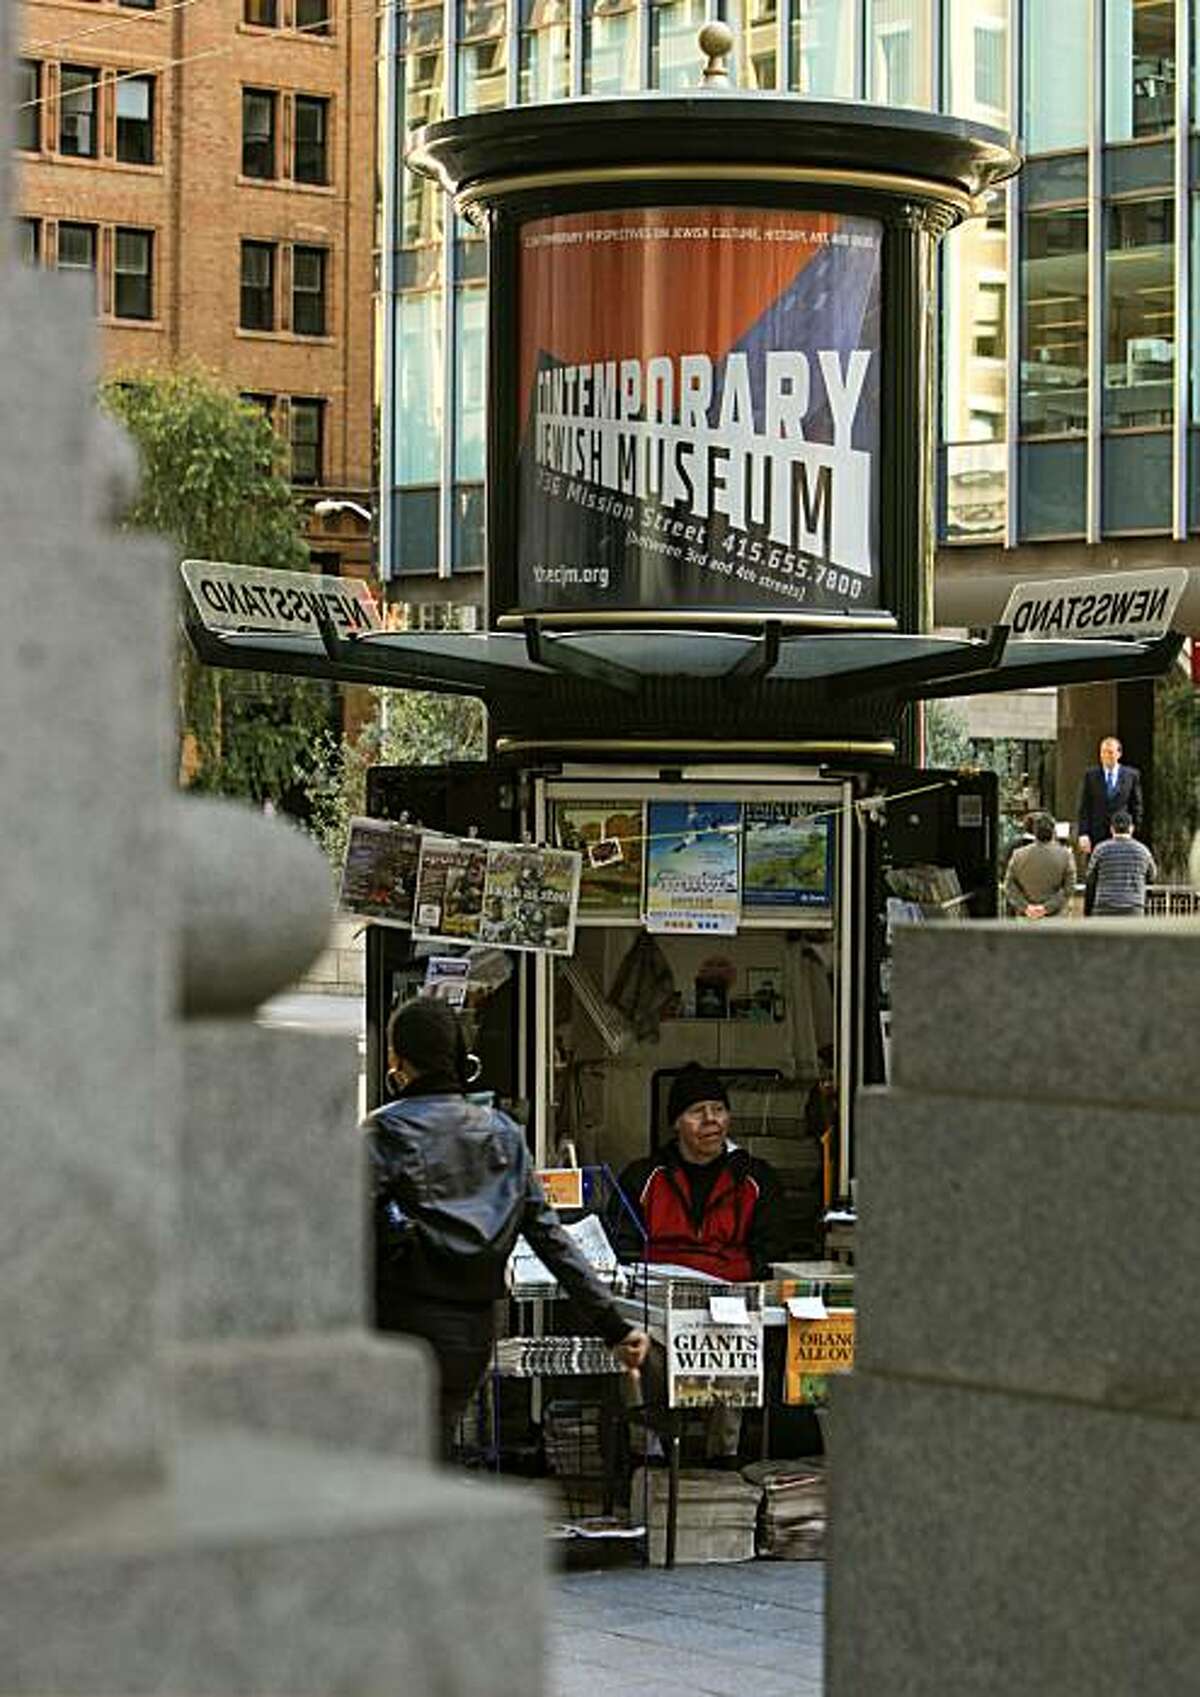 Patrick McCaffrey, one of the last surving vendors, works the financial district selling papers, on Thursday Nov. 11, 2010 in San Francisco, Calif., most all stands now sit idle because news stands themselves have become all but extinct.